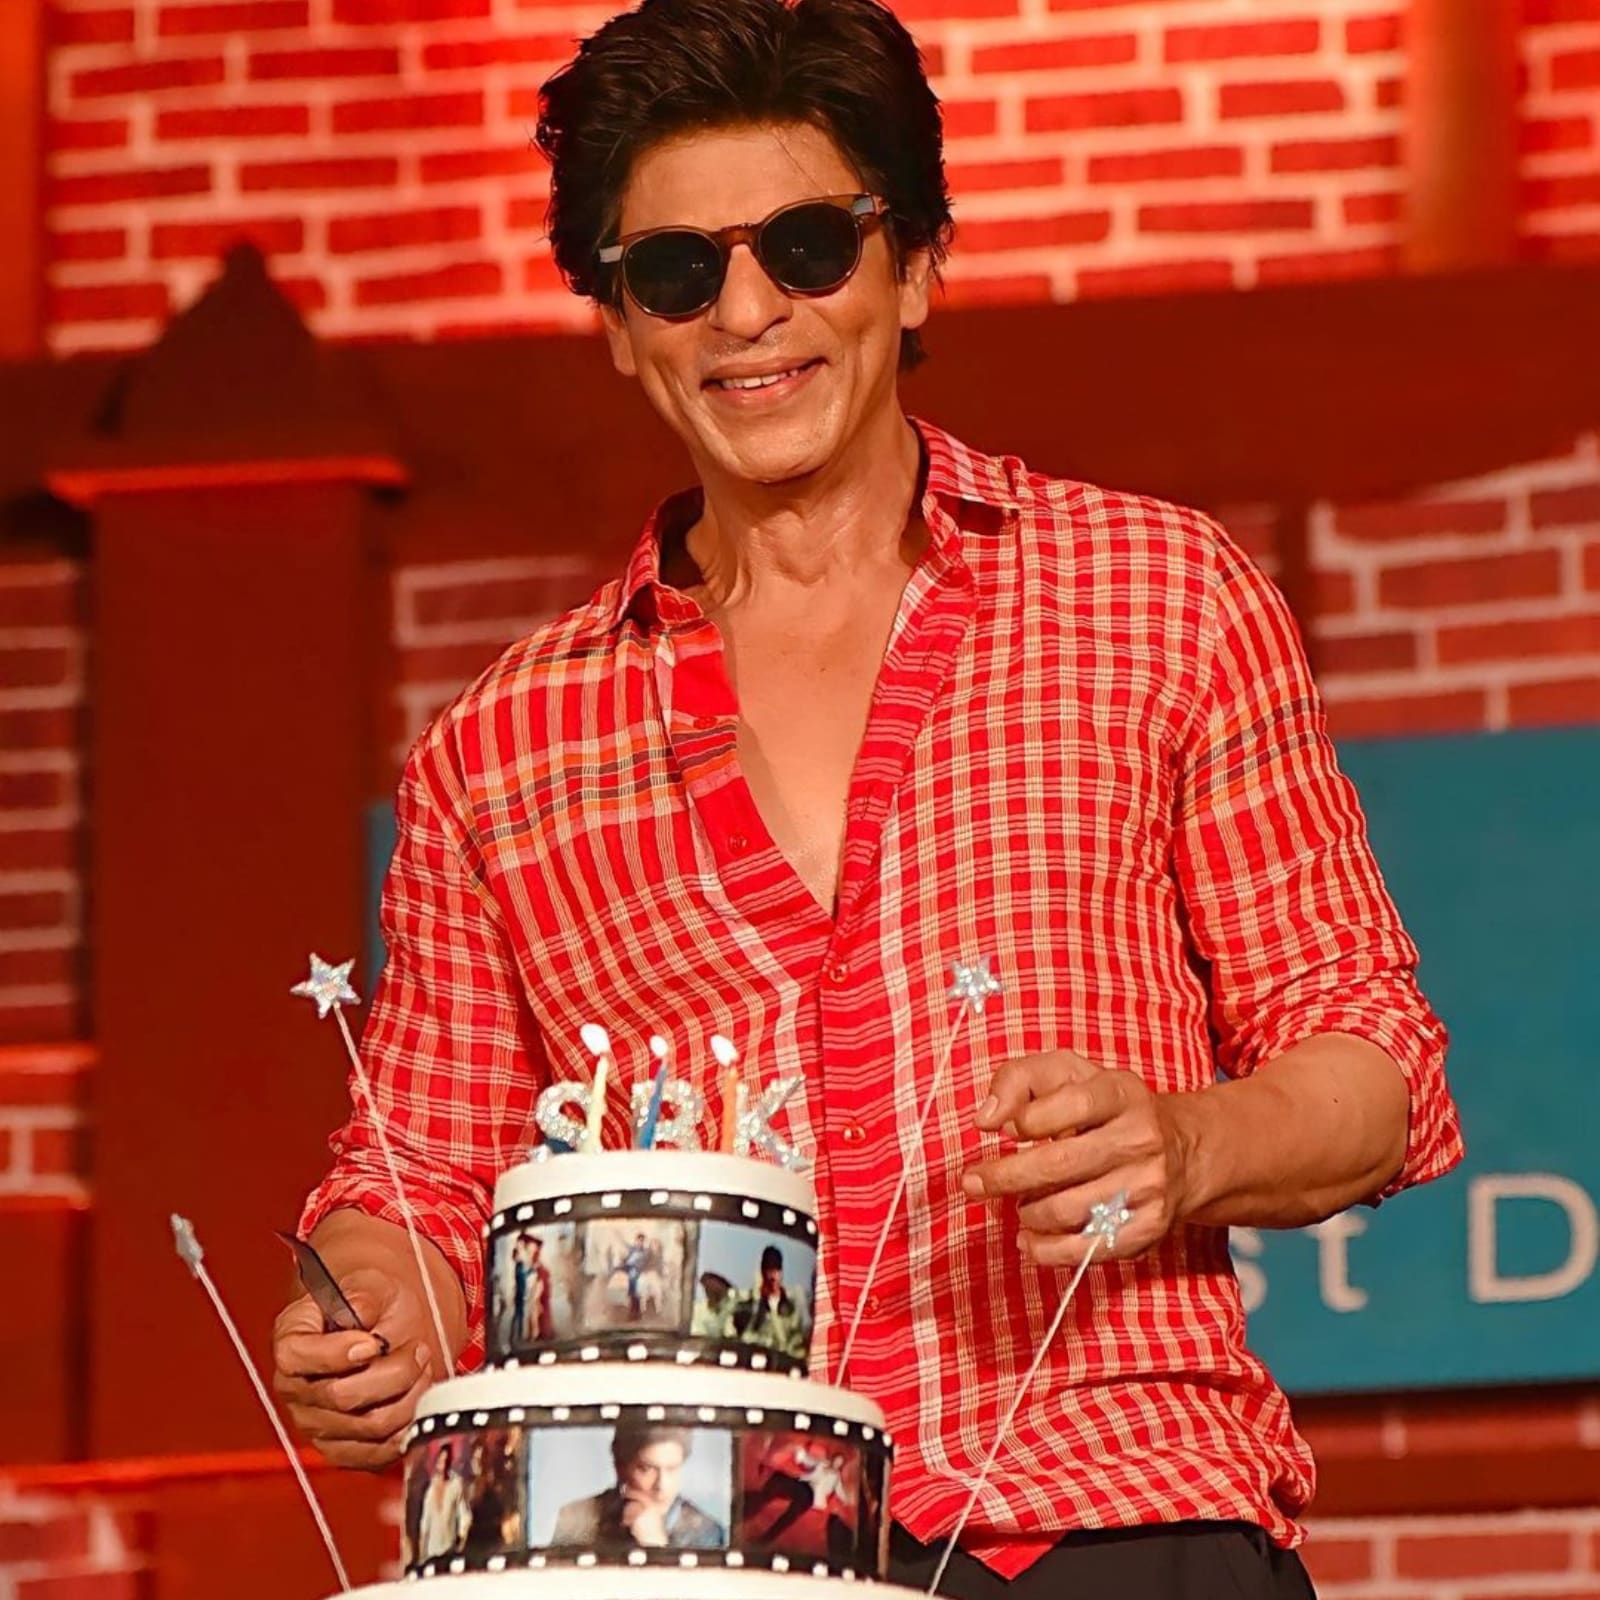 Shah Rukh Khan Grooves To 'Chaiyya Chaiyya' At SRK Day Event, Cuts A Unique  Three-Tiered Crown Cake